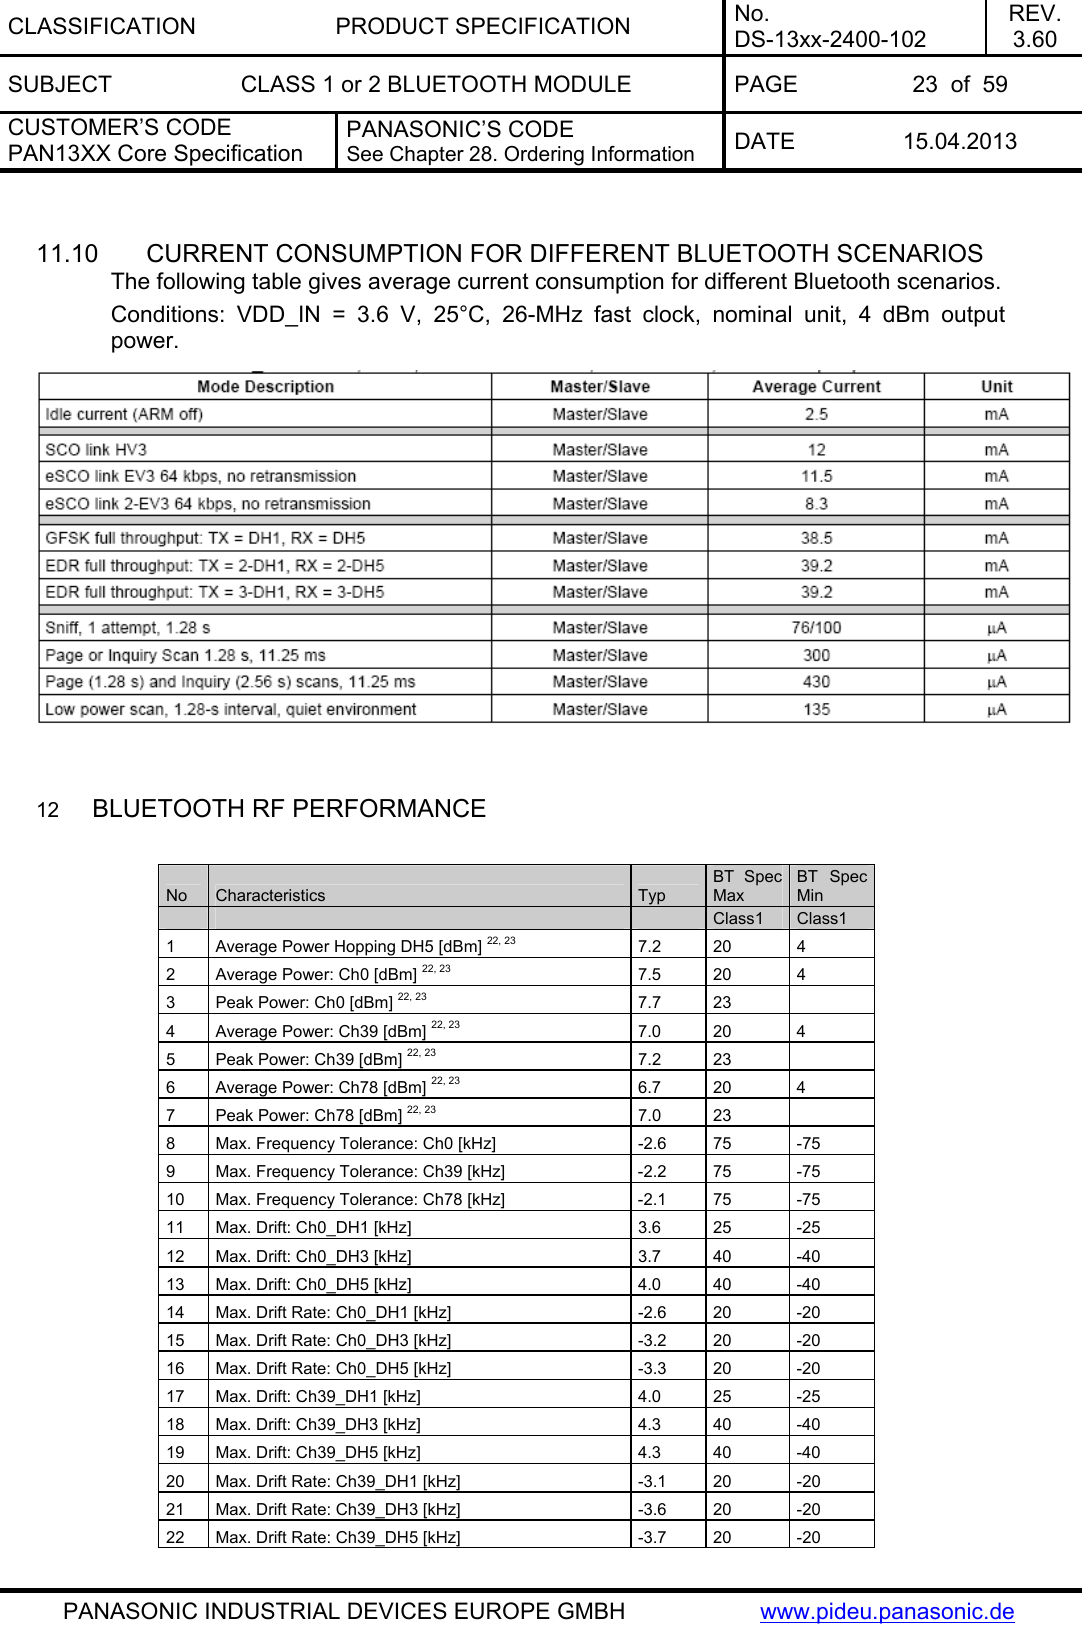 CLASSIFICATION PRODUCT SPECIFICATION No. DS-13xx-2400-102 REV. 3.60 SUBJECT  CLASS 1 or 2 BLUETOOTH MODULE  PAGE  23  of  59 CUSTOMER’S CODE PAN13XX Core Specification PANASONIC’S CODE See Chapter 28. Ordering Information  DATE 15.04.2013   PANASONIC INDUSTRIAL DEVICES EUROPE GMBH  www.pideu.panasonic.de  11.10  CURRENT CONSUMPTION FOR DIFFERENT BLUETOOTH SCENARIOS The following table gives average current consumption for different Bluetooth scenarios. Conditions: VDD_IN = 3.6 V, 25°C, 26-MHz fast clock, nominal unit, 4 dBm output power.   12  BLUETOOTH RF PERFORMANCE  No  Characteristics  Typ BT Spec Max BT Spec Min       Class1  Class1 1  Average Power Hopping DH5 [dBm] 22, 23 7.2 20 4 2  Average Power: Ch0 [dBm] 22, 23 7.5 20 4 3  Peak Power: Ch0 [dBm] 22, 23 7.7 23  4  Average Power: Ch39 [dBm] 22, 23 7.0 20 4 5  Peak Power: Ch39 [dBm] 22, 23 7.2 23  6  Average Power: Ch78 [dBm] 22, 23 6.7 20 4 7  Peak Power: Ch78 [dBm] 22, 23 7.0 23  8  Max. Frequency Tolerance: Ch0 [kHz]  -2.6  75  -75 9  Max. Frequency Tolerance: Ch39 [kHz]  -2.2  75  -75 10  Max. Frequency Tolerance: Ch78 [kHz]  -2.1  75  -75 11  Max. Drift: Ch0_DH1 [kHz]  3.6  25  -25 12  Max. Drift: Ch0_DH3 [kHz]  3.7  40  -40 13  Max. Drift: Ch0_DH5 [kHz]  4.0  40  -40 14  Max. Drift Rate: Ch0_DH1 [kHz]  -2.6  20  -20 15  Max. Drift Rate: Ch0_DH3 [kHz]  -3.2  20  -20 16  Max. Drift Rate: Ch0_DH5 [kHz]  -3.3  20  -20 17  Max. Drift: Ch39_DH1 [kHz]  4.0  25  -25 18  Max. Drift: Ch39_DH3 [kHz]  4.3  40  -40 19  Max. Drift: Ch39_DH5 [kHz]  4.3  40  -40 20  Max. Drift Rate: Ch39_DH1 [kHz]  -3.1  20  -20 21  Max. Drift Rate: Ch39_DH3 [kHz]  -3.6  20  -20 22  Max. Drift Rate: Ch39_DH5 [kHz]  -3.7  20  -20  